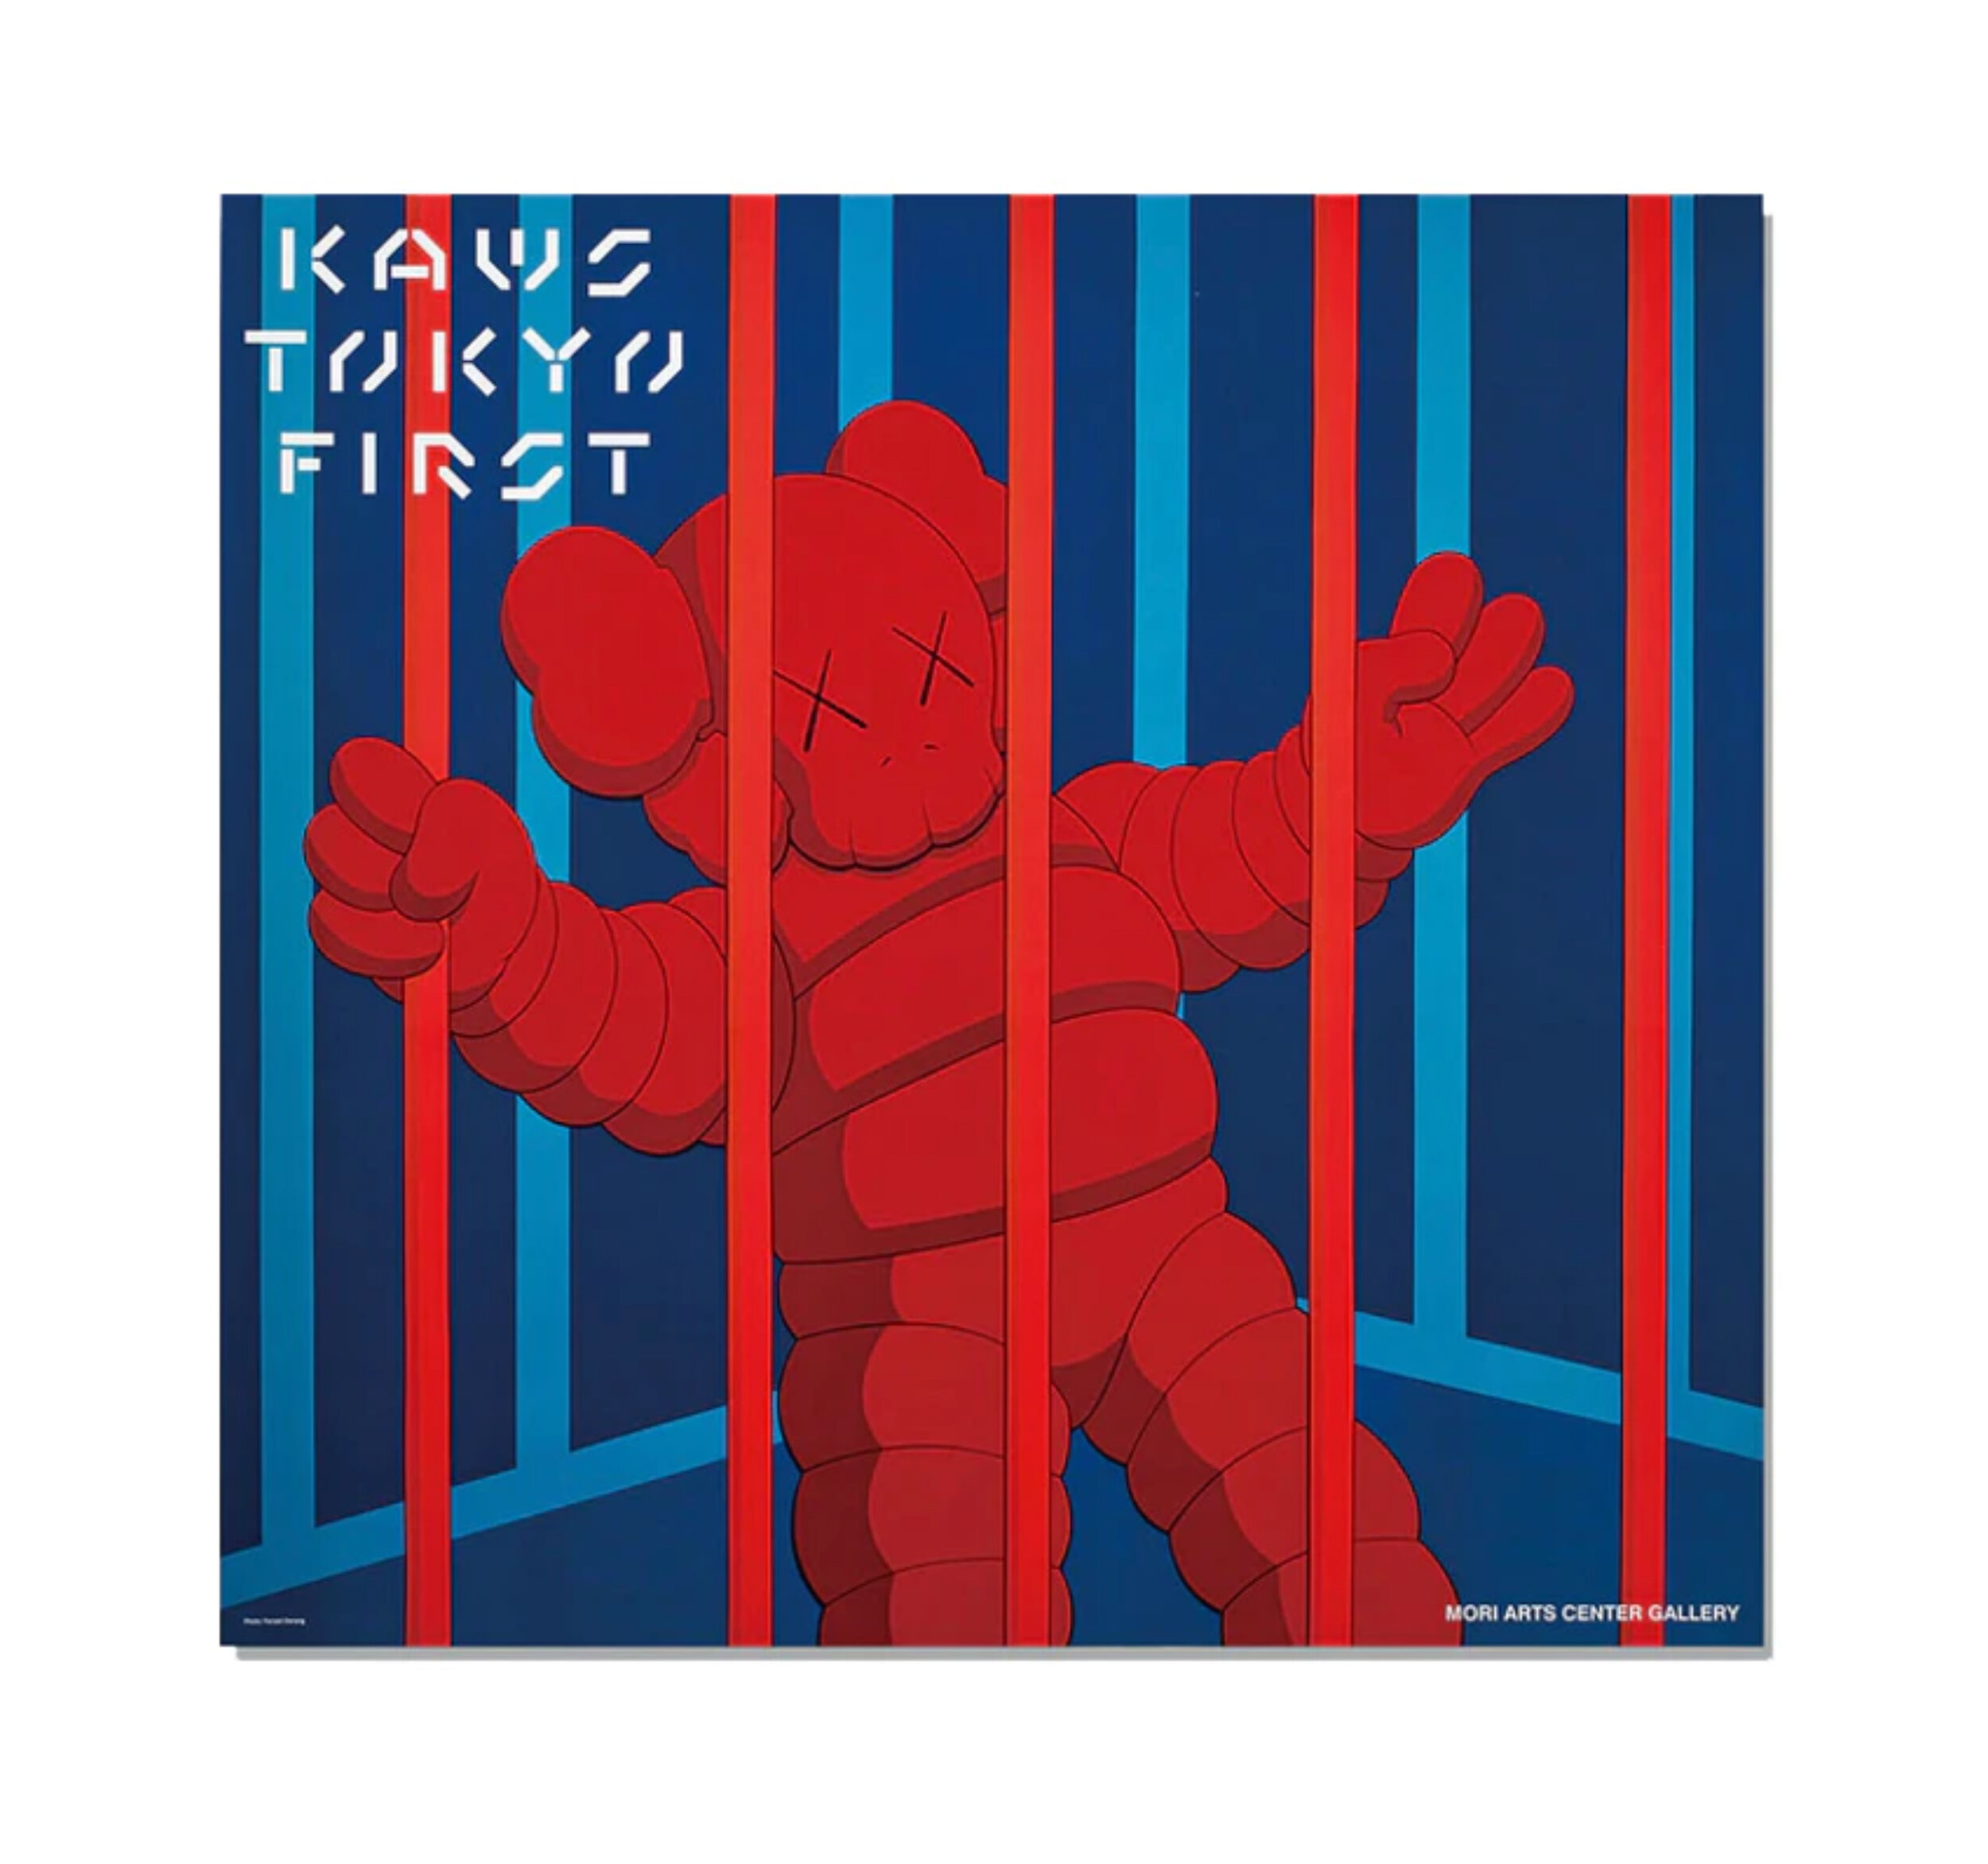 Kaws Tokyo First Poster ポスター 3点セット カウズ - アニメグッズ